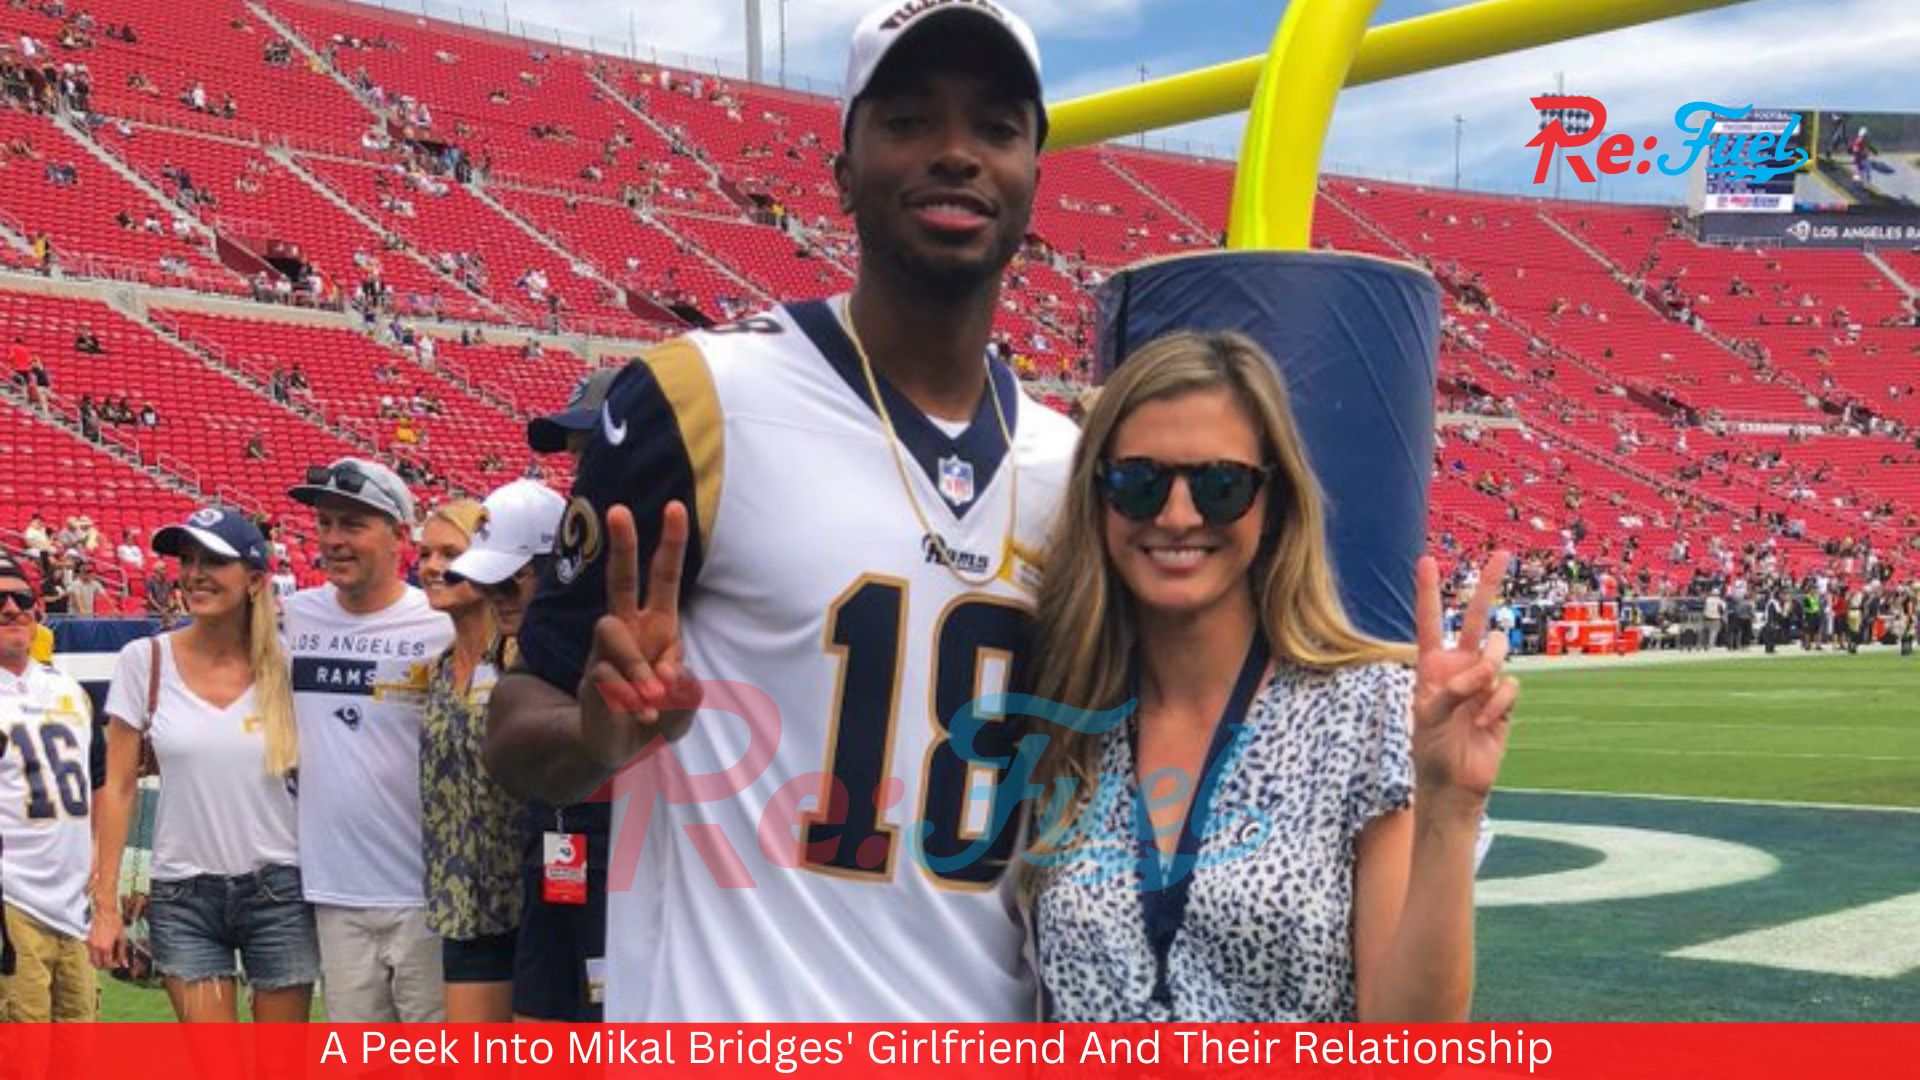 A Peek Into Mikal Bridges' Girlfriend And Their Relationship